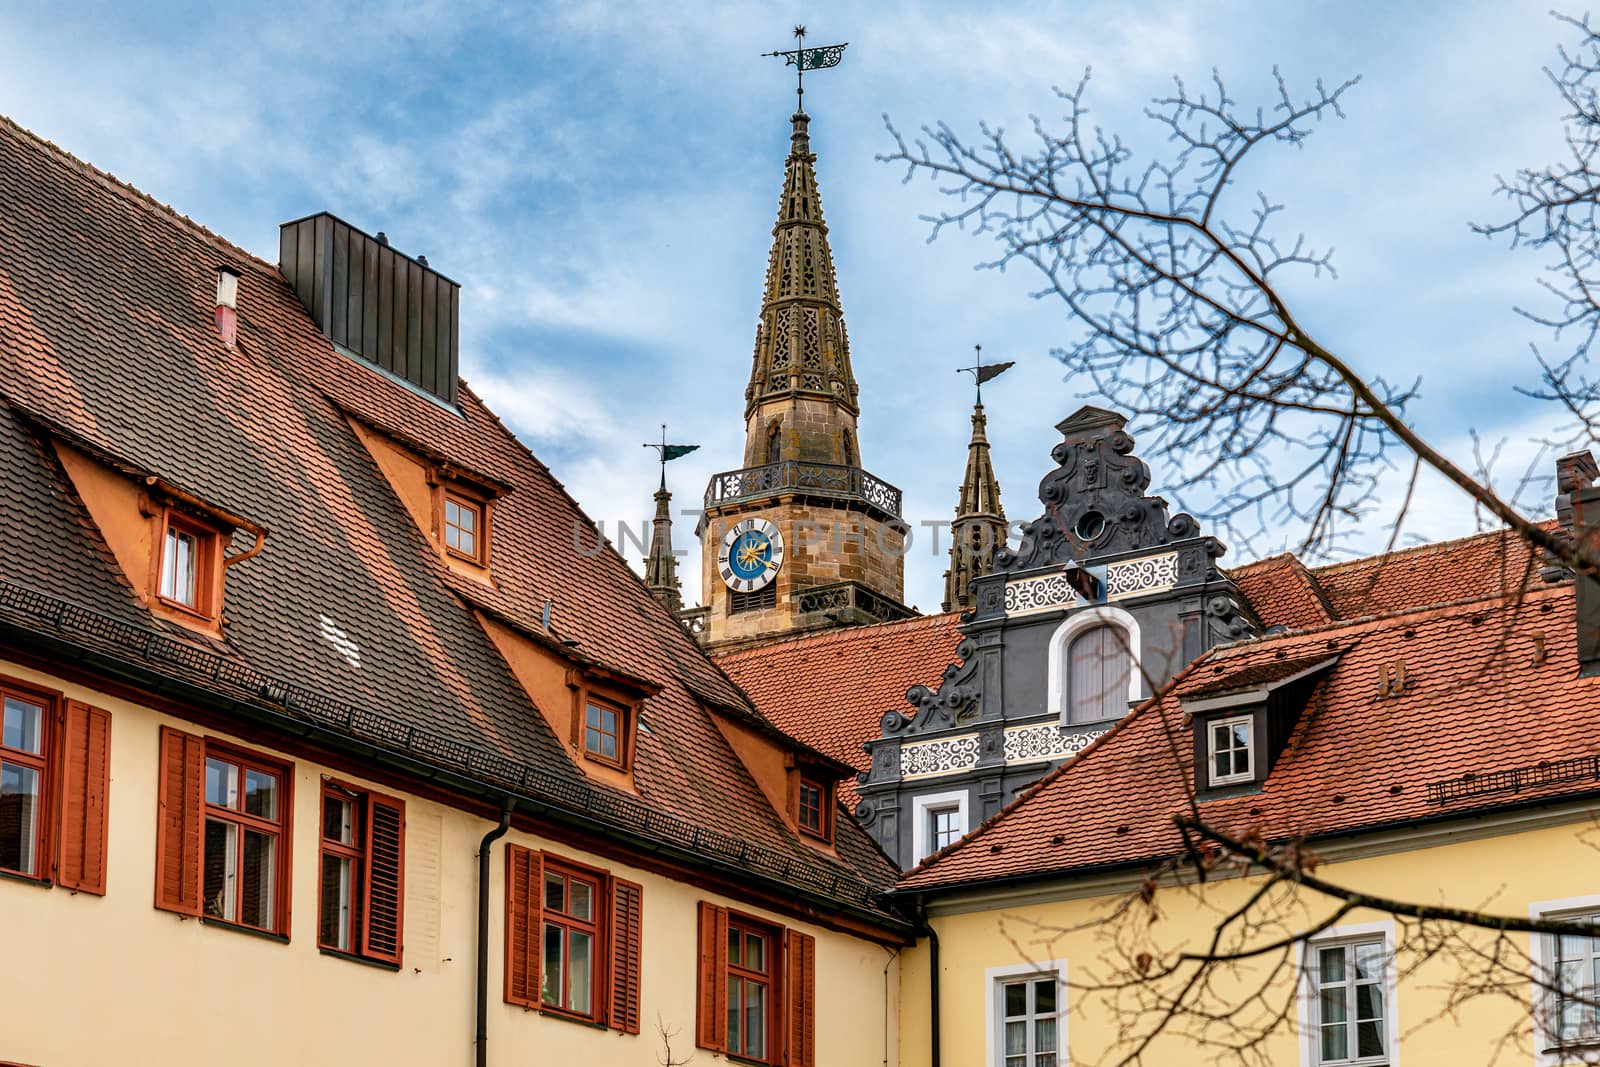 Clocks on the tower of  Sankt Gumbertus church, Ansbach by seka33